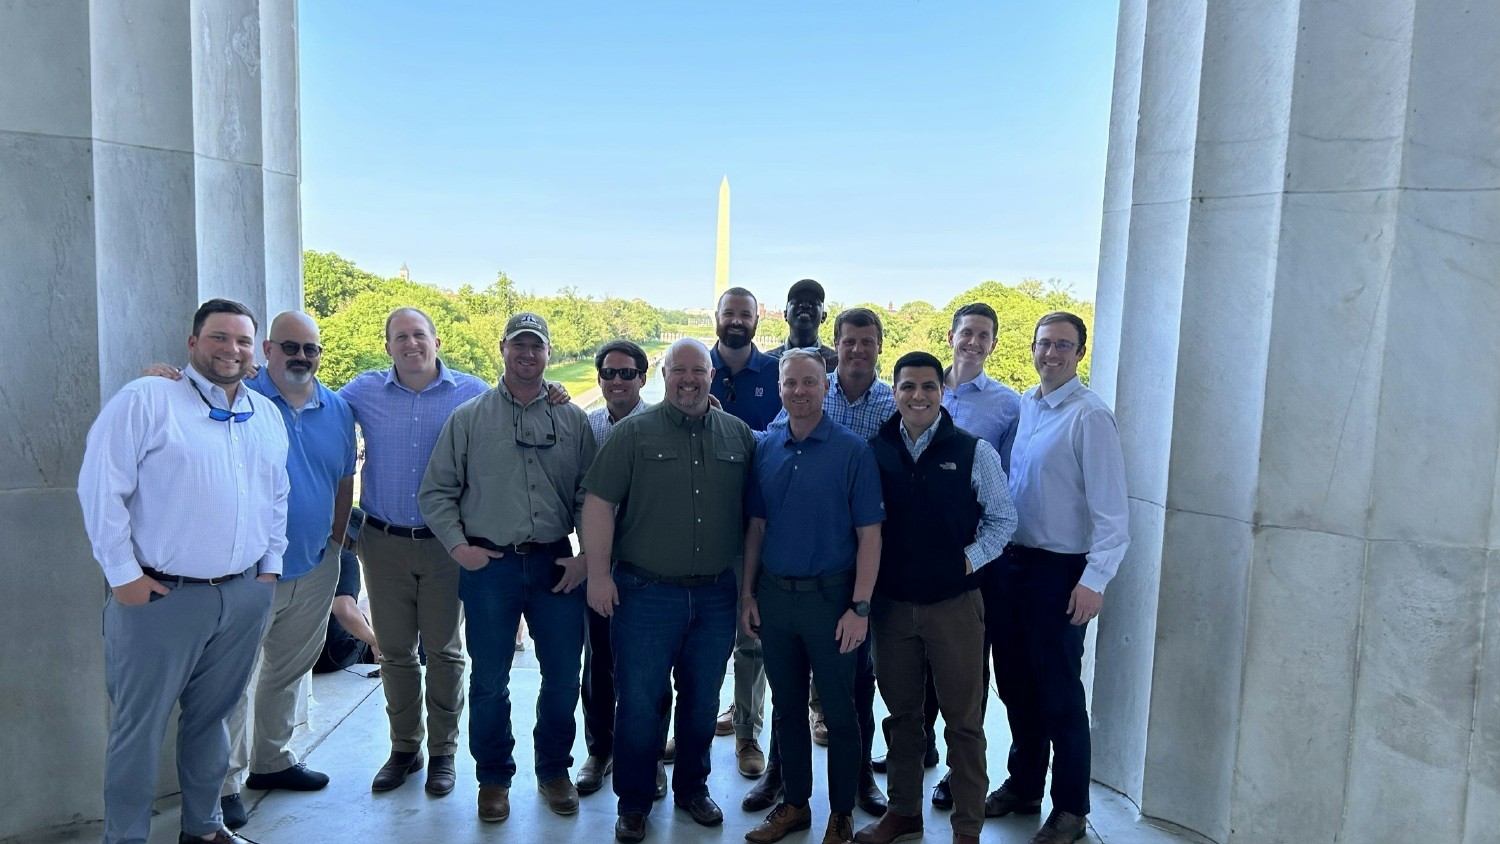 Hoar's Leadership Council visited the monuments in Washington, D.C. during a training weekend.